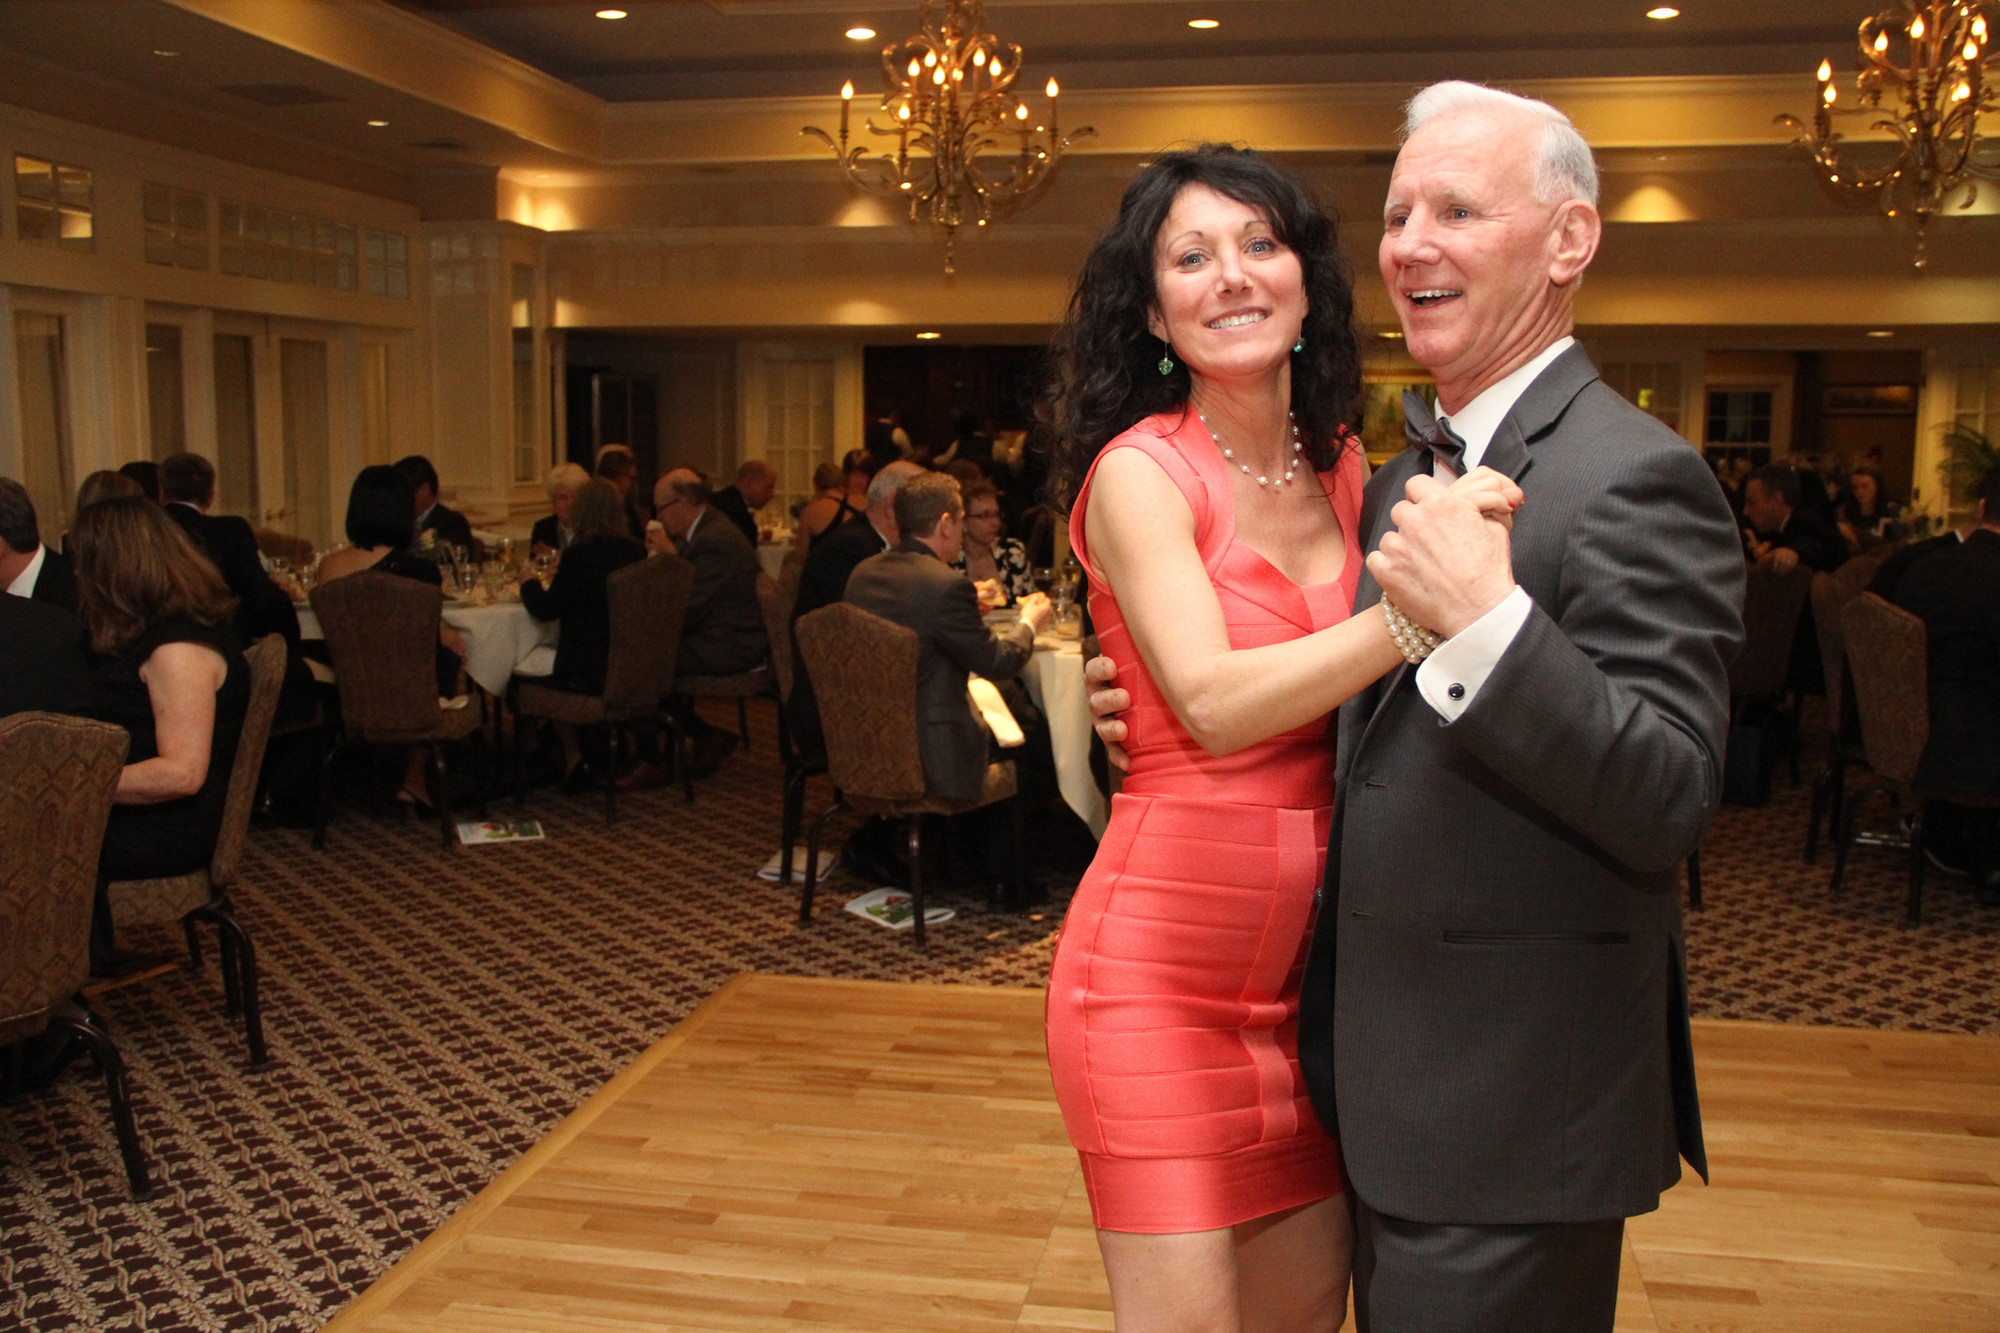 The Rockville Centre Education Foundation held its annual gala last Saturday, raising funds for the school district and honoring partners in education. Above, honoree Mike Davey danced with his daughter Michele.